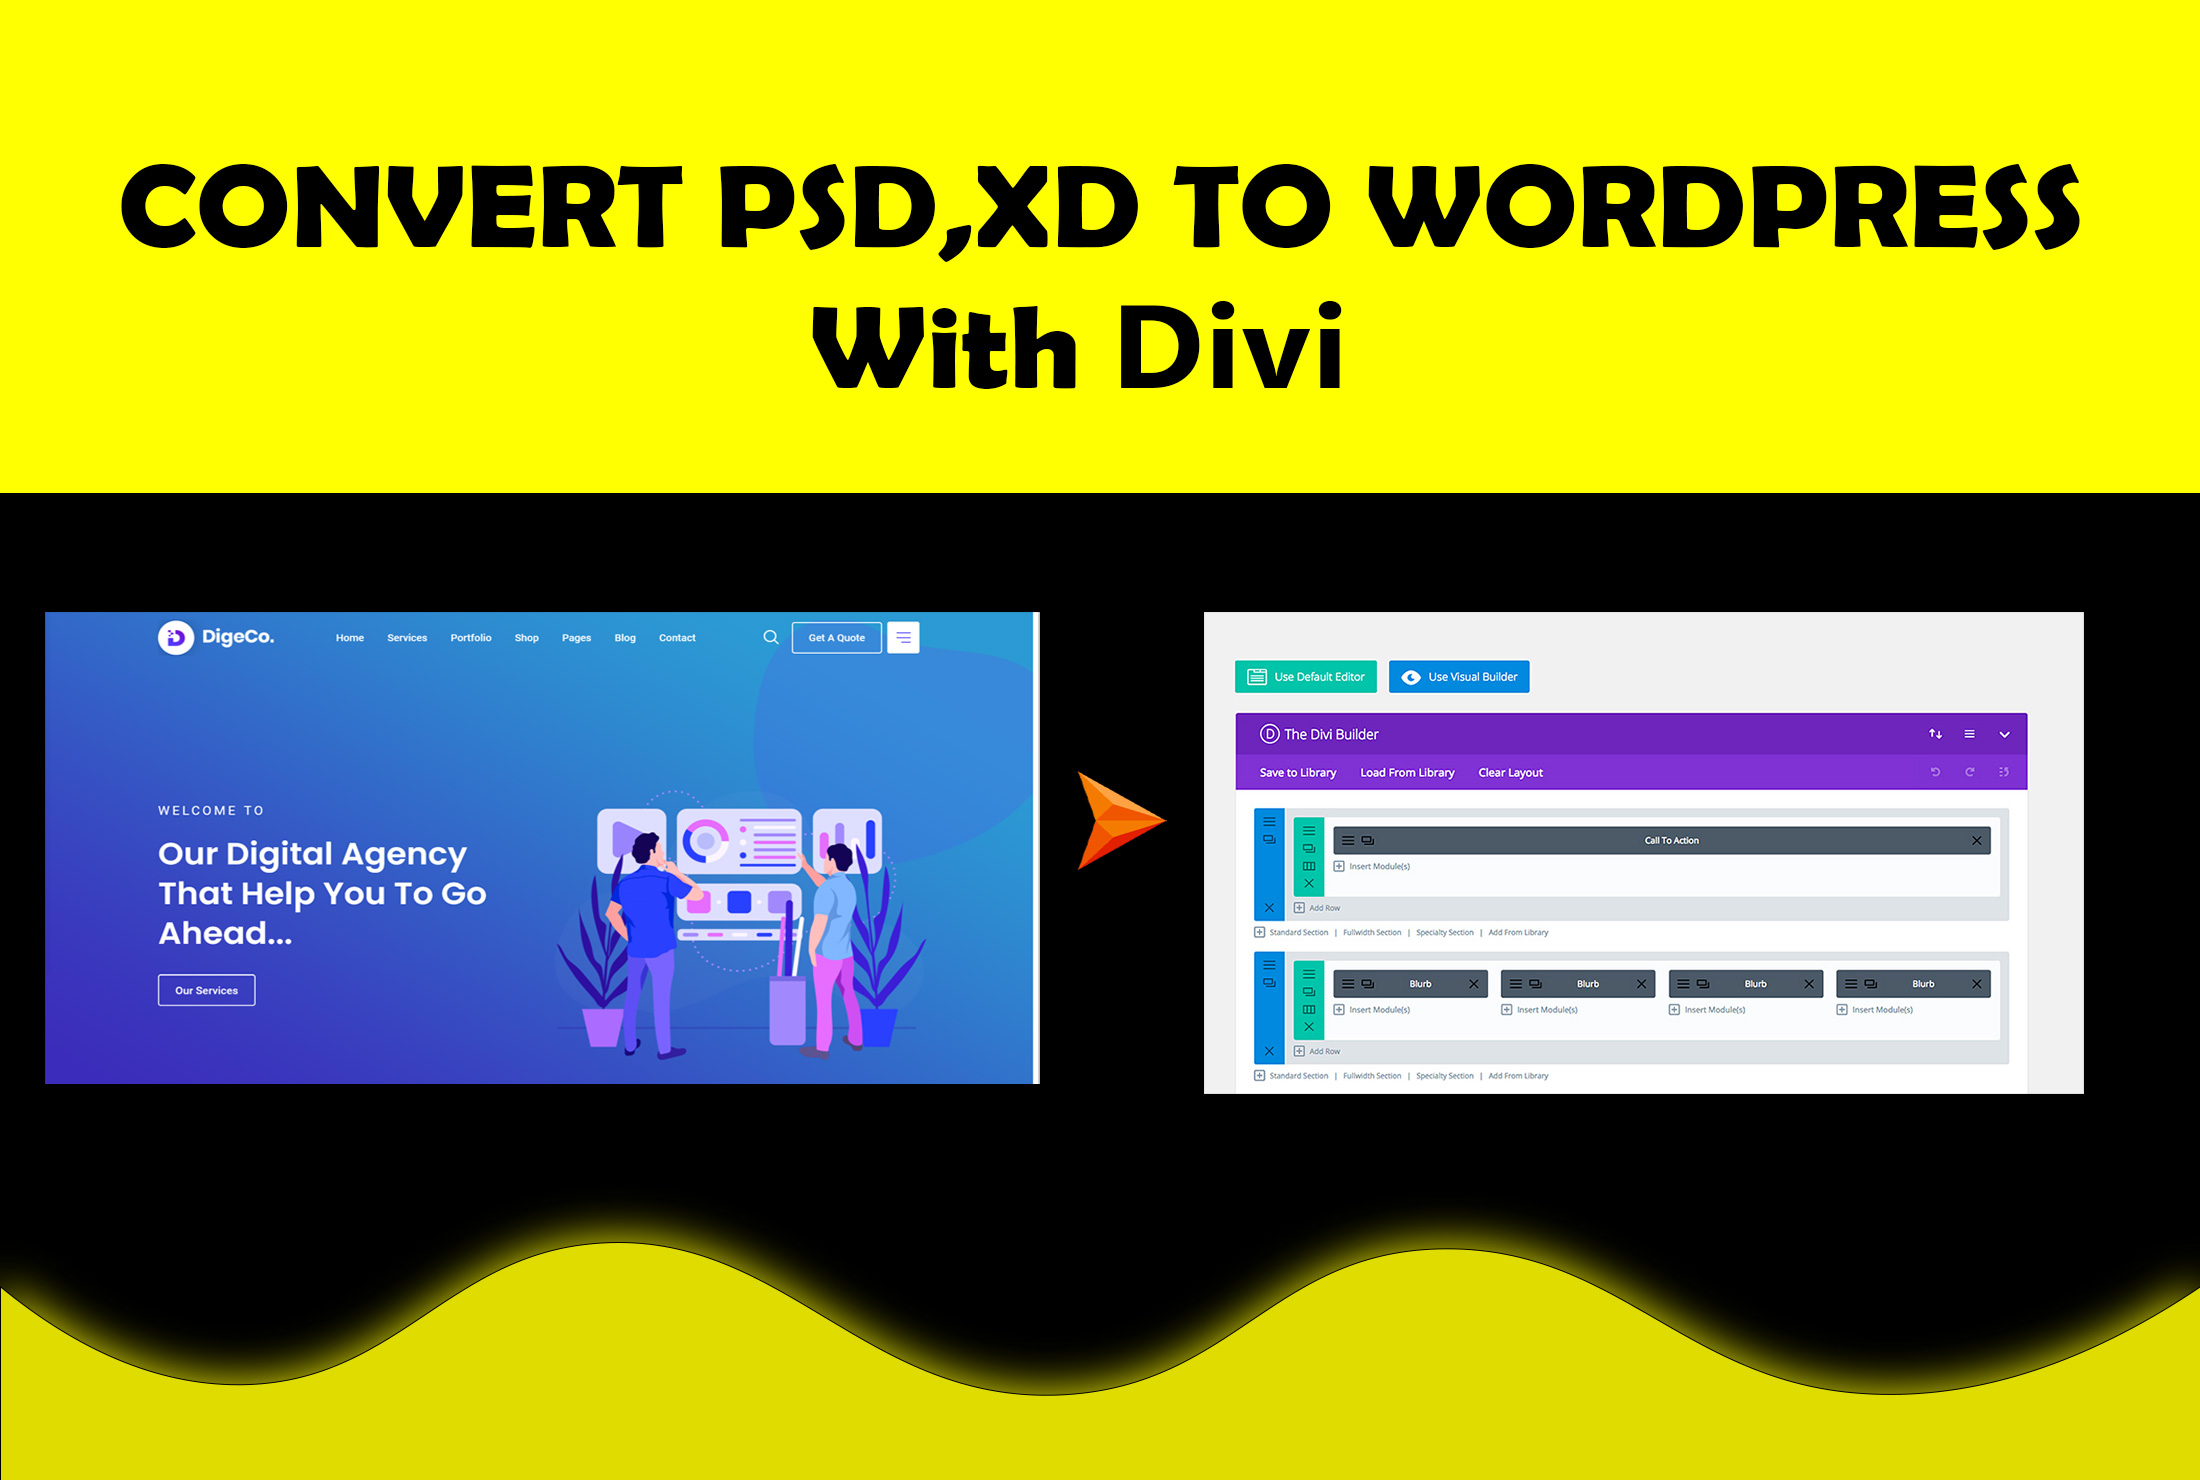 Built your wordpress website with divi builder from elegant theme